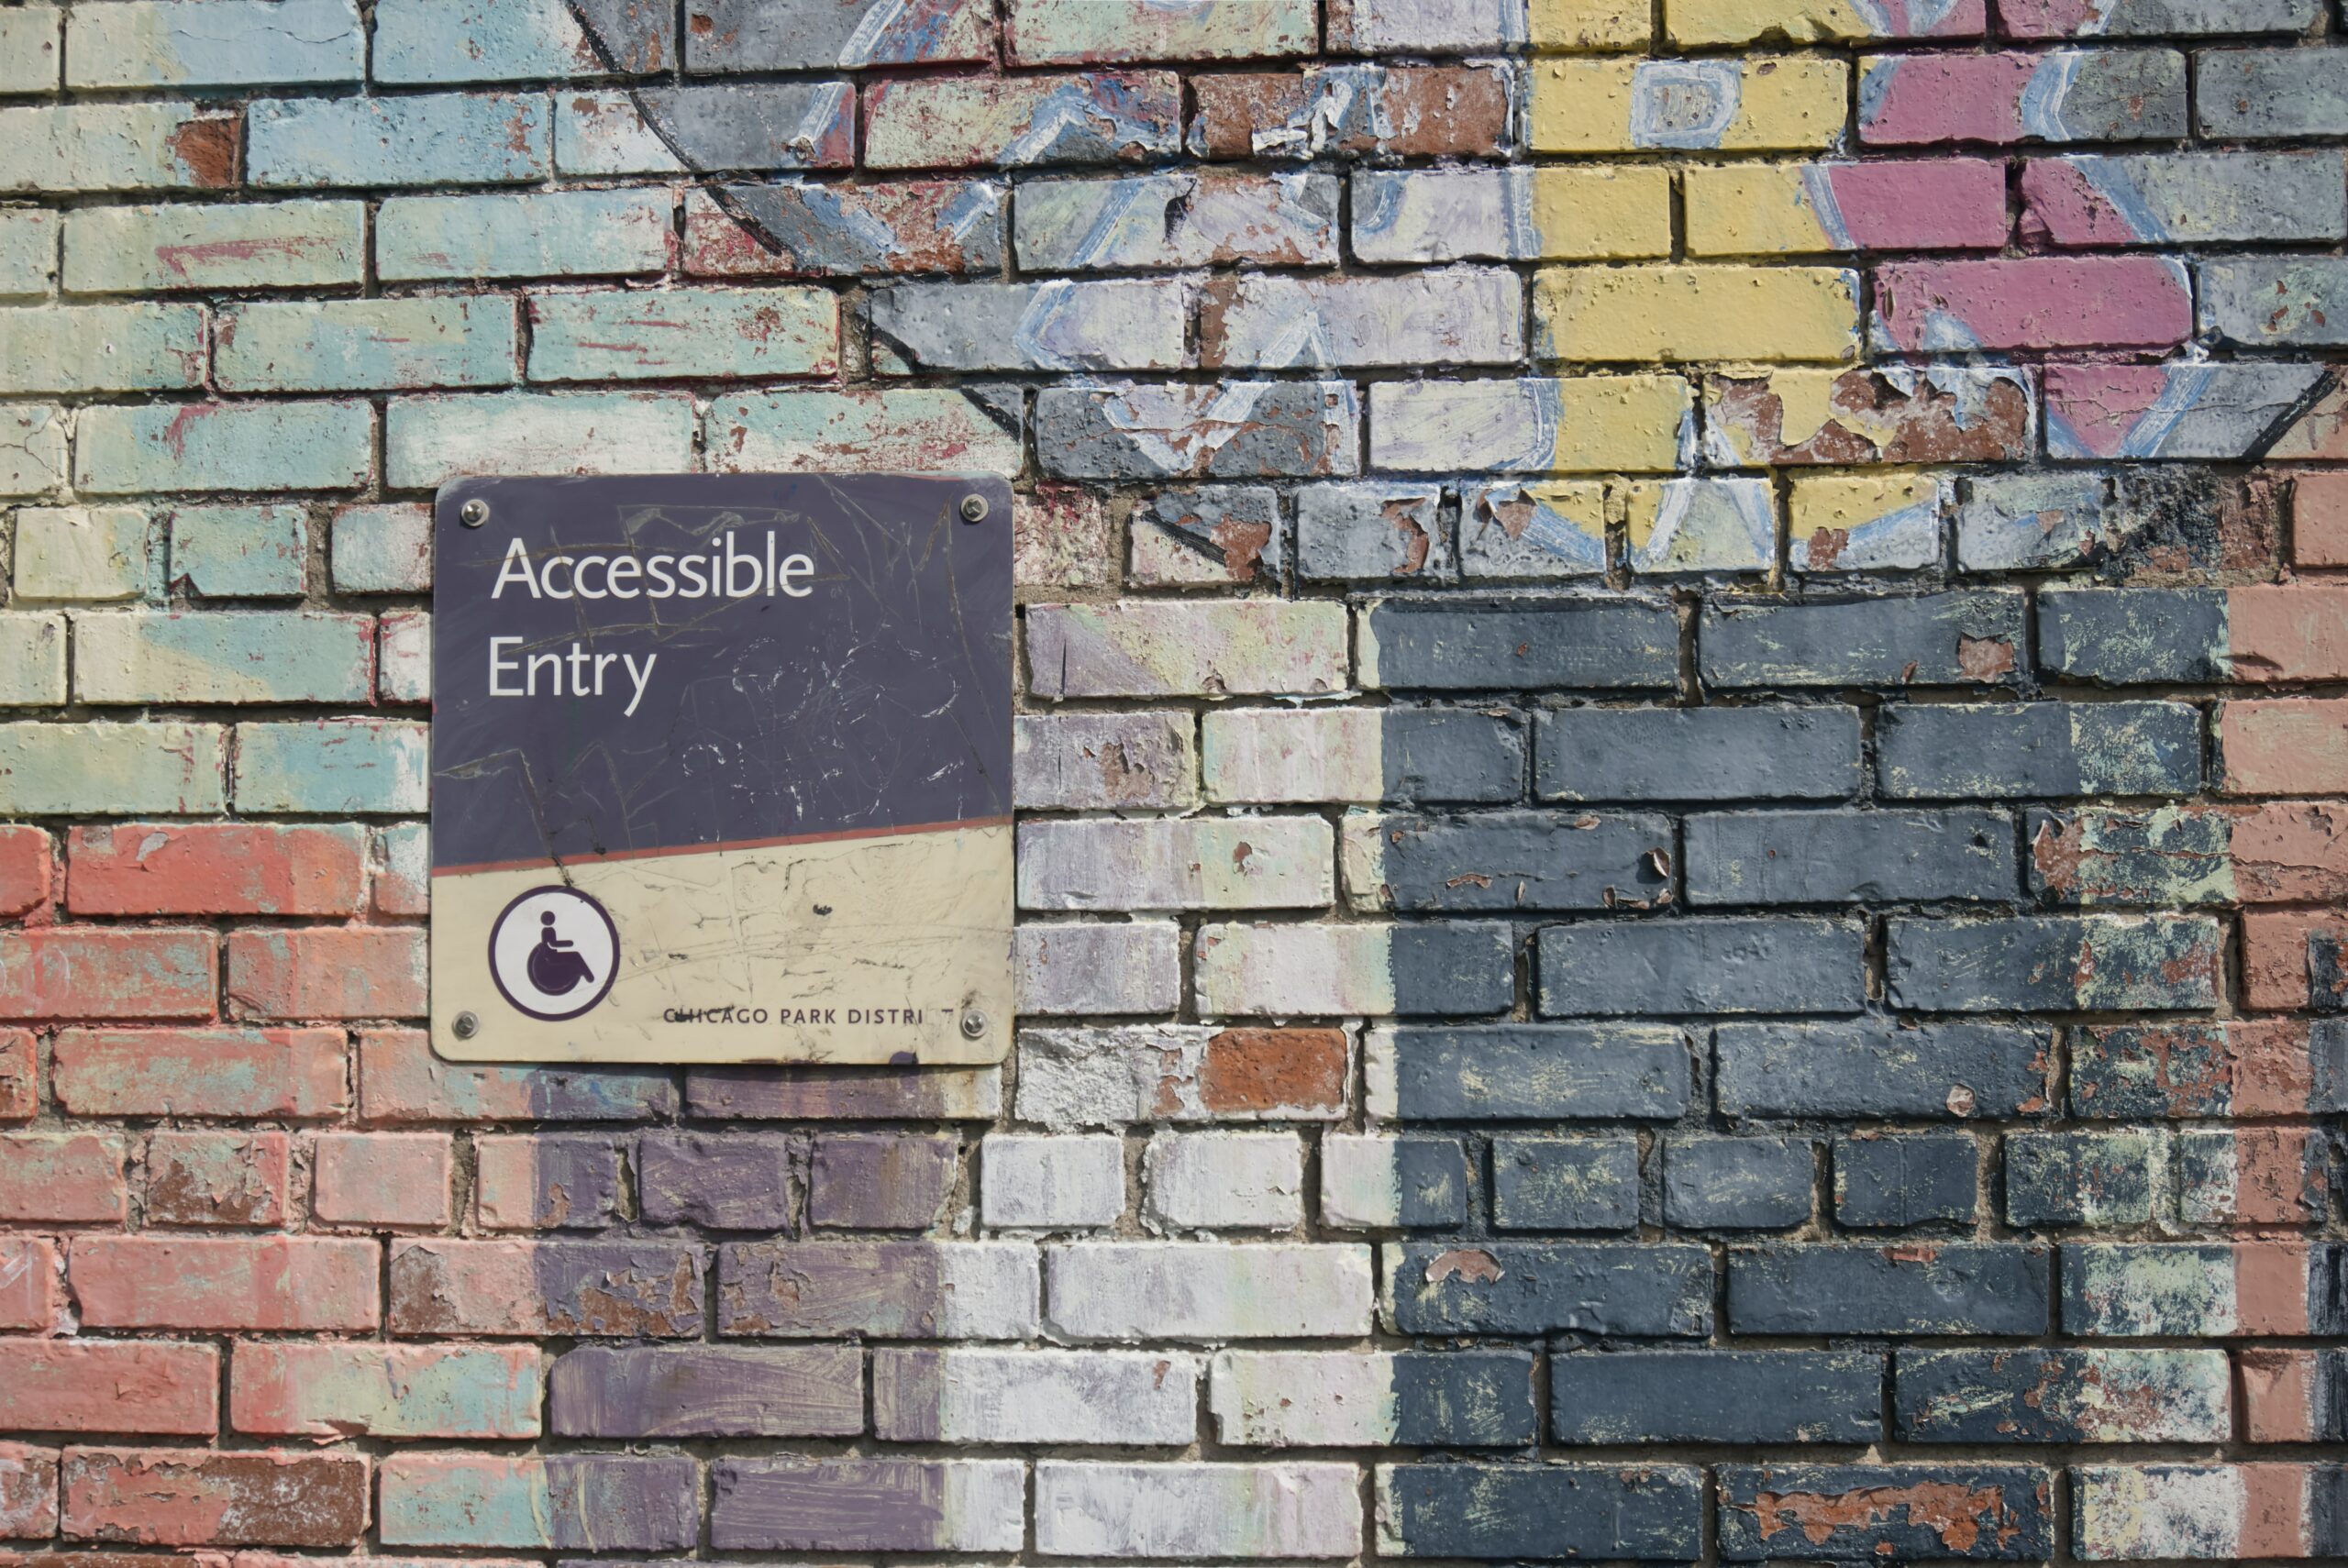 A multi-coloured brink wall sports a sign reading "Accessible Entry," but no door is visible.